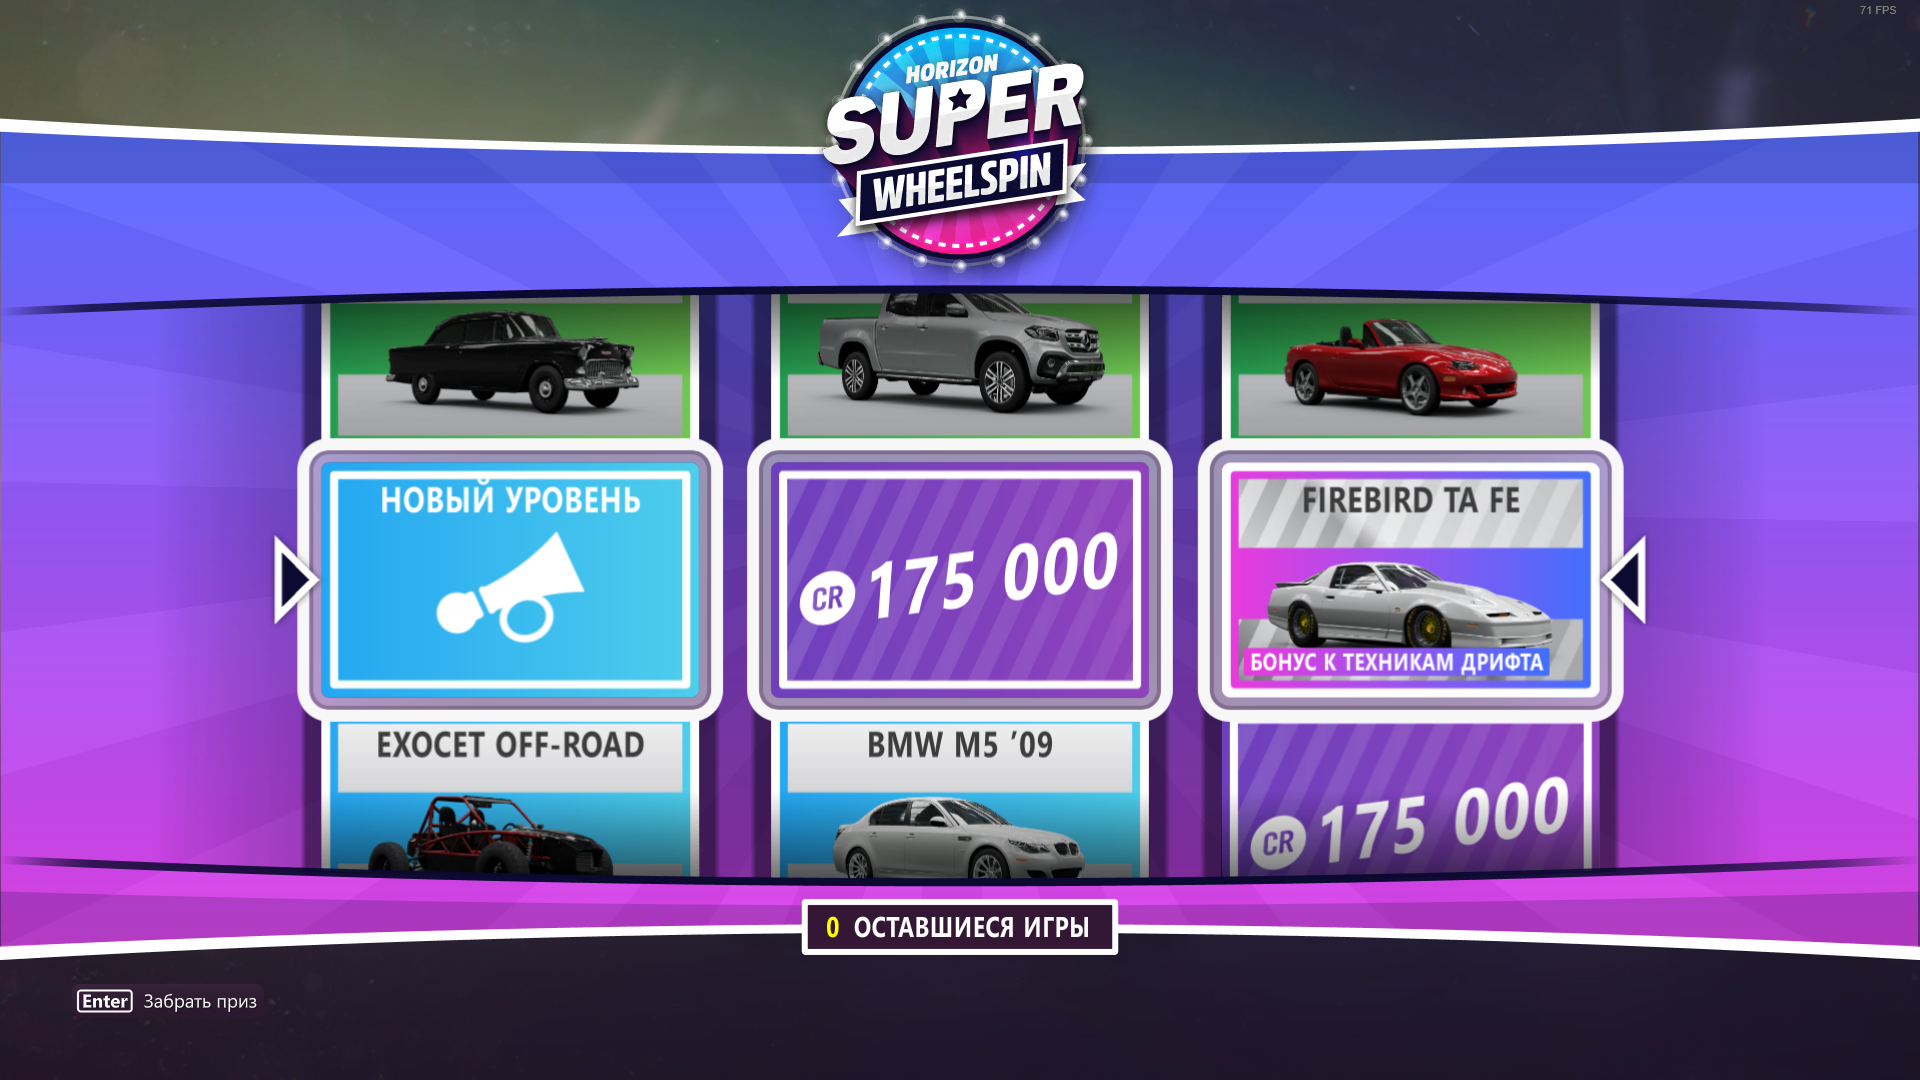 SUPER WHEELSPIN image 1